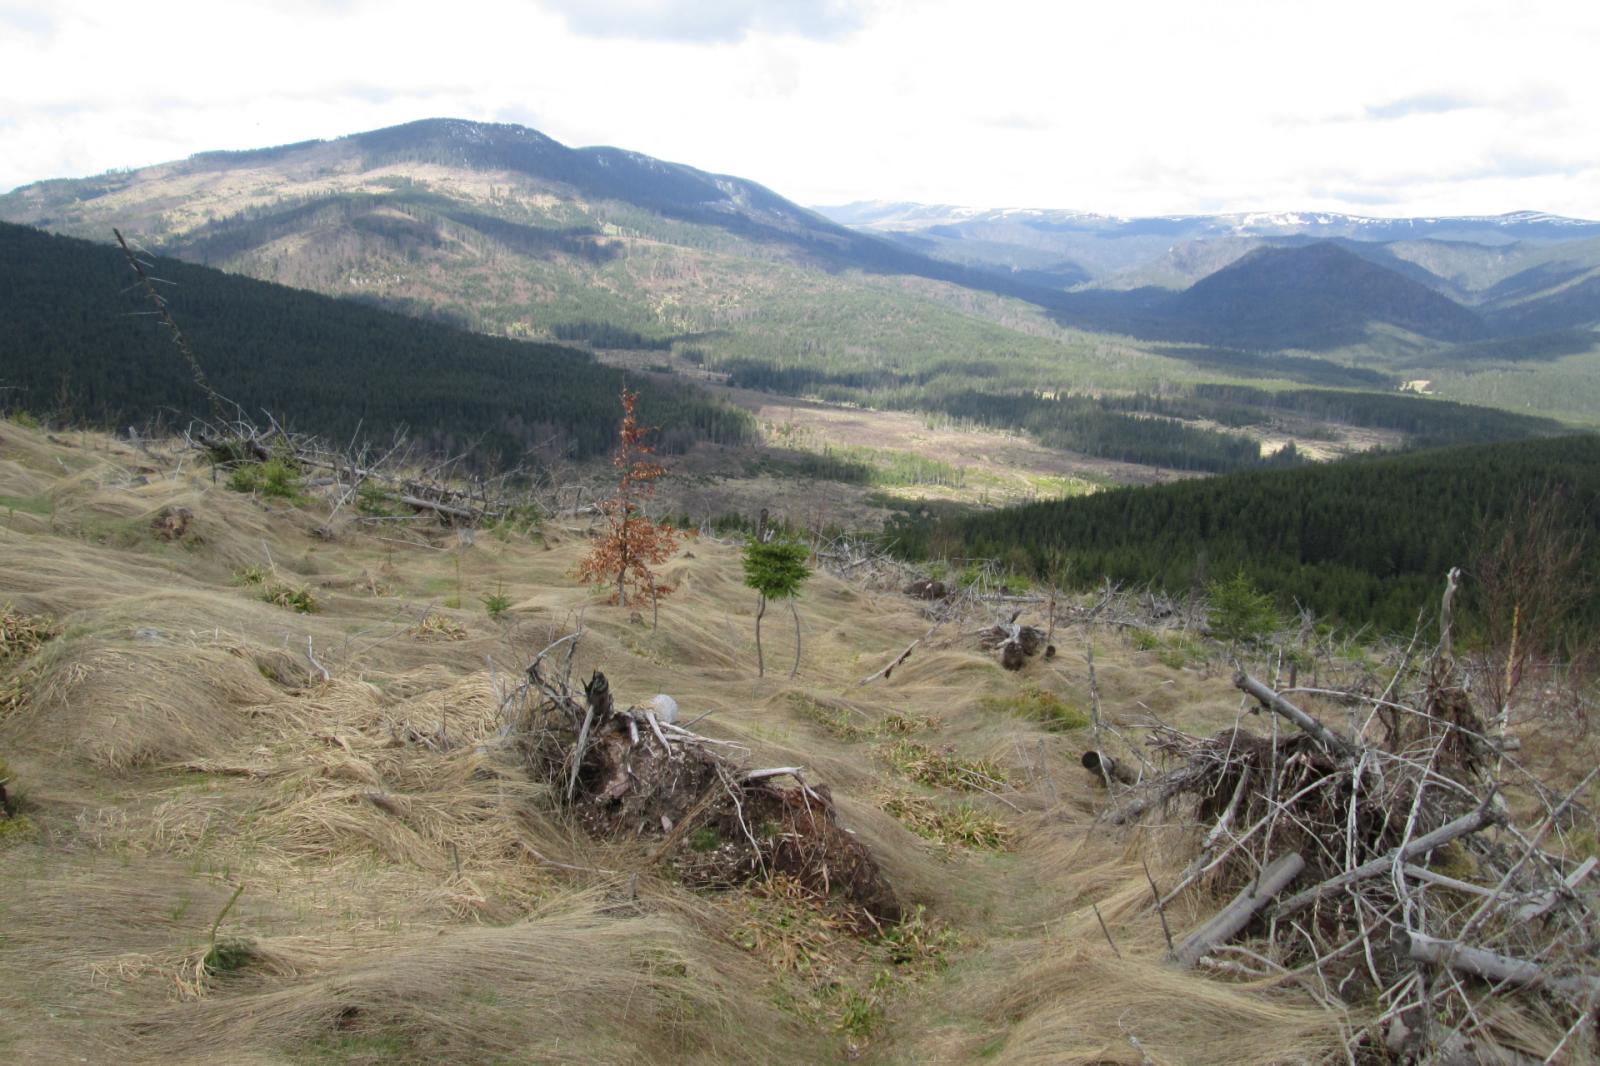 Of the 38 million cubic meters of forest lost to Romania’s logging industry each year, only 18 million are licensed and accounted for.